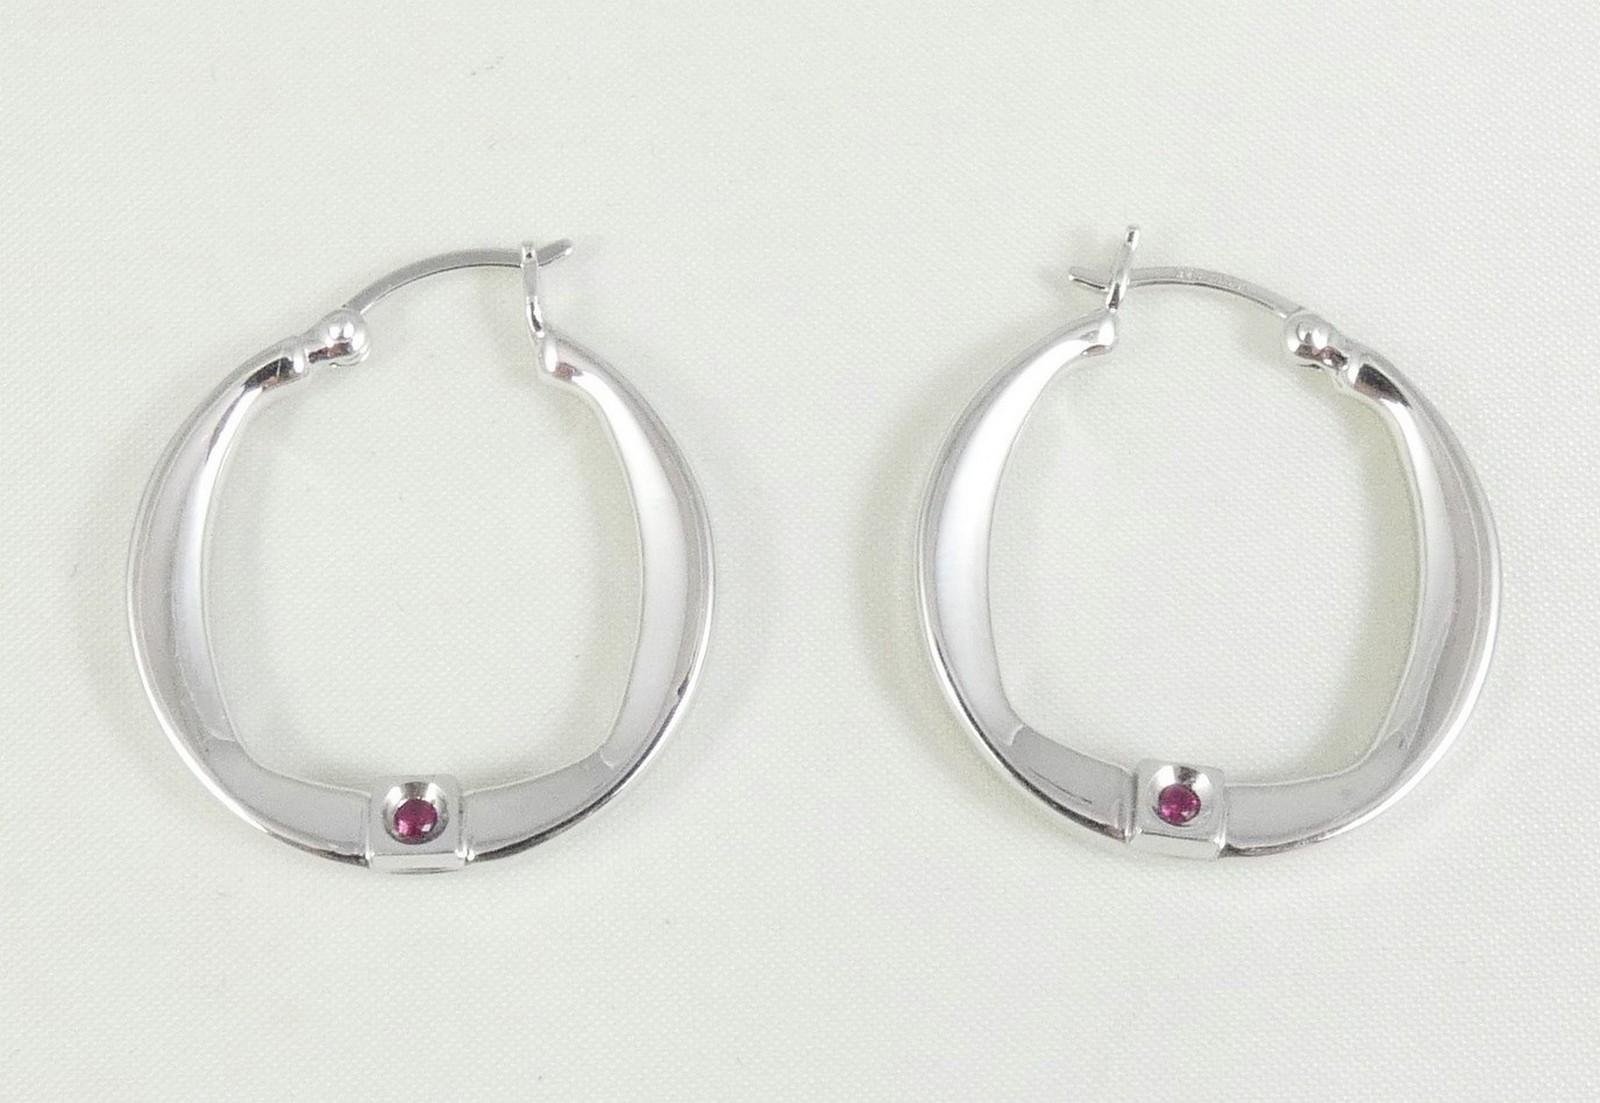 CONTEMPORARY EARRINGS